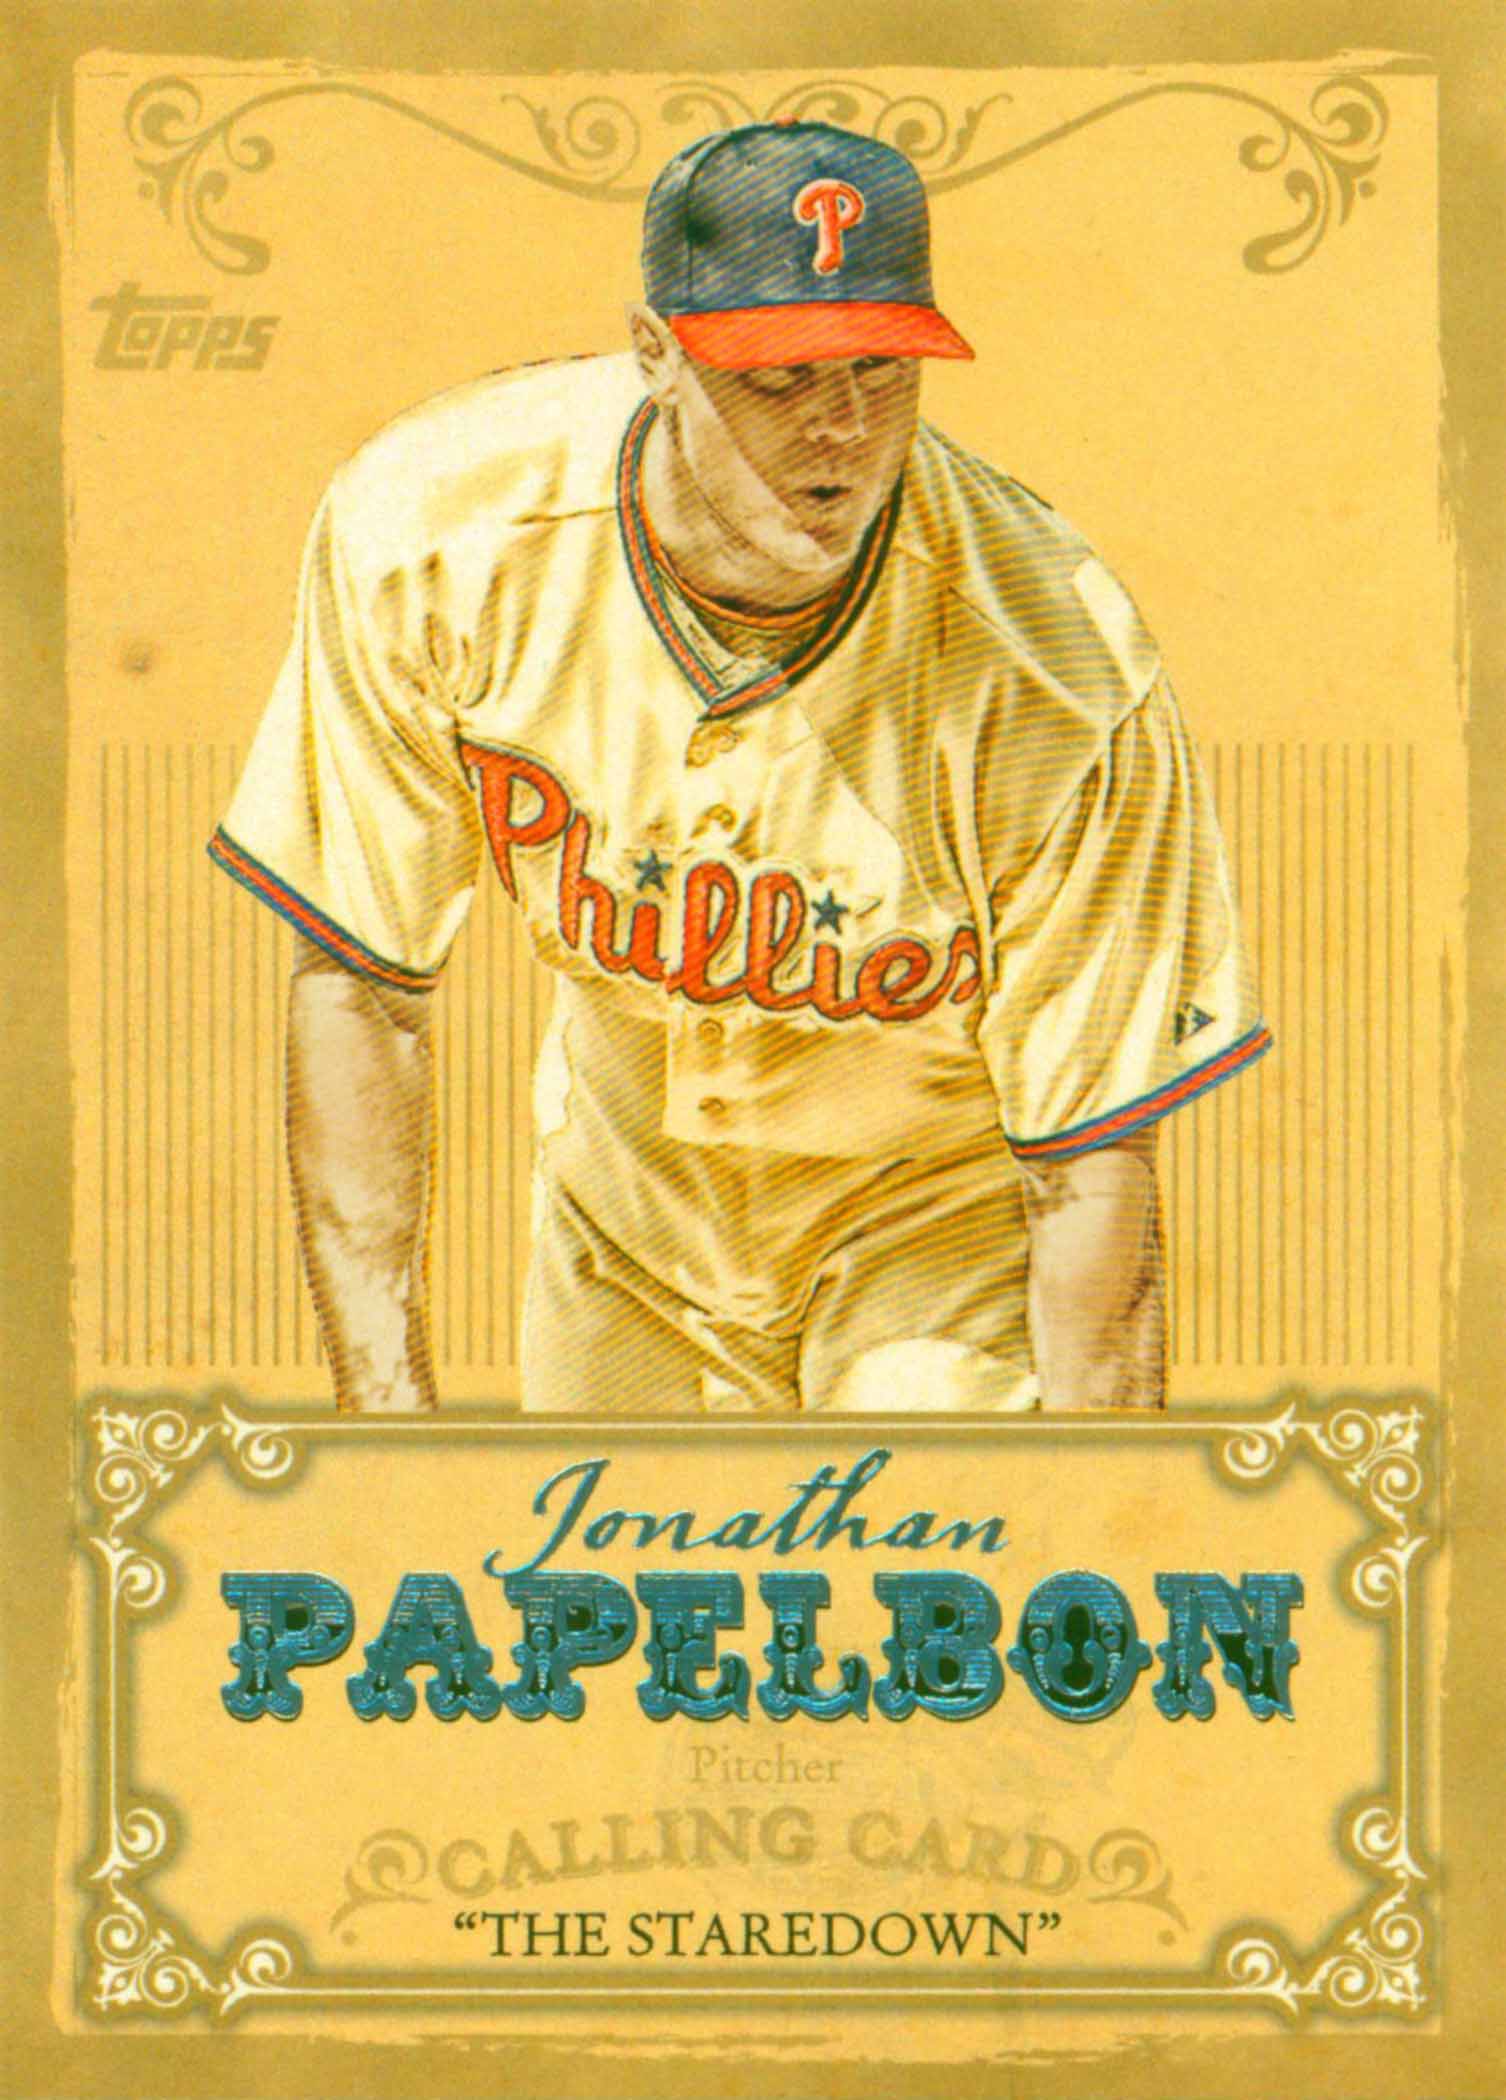 2013 Topps Calling Cards